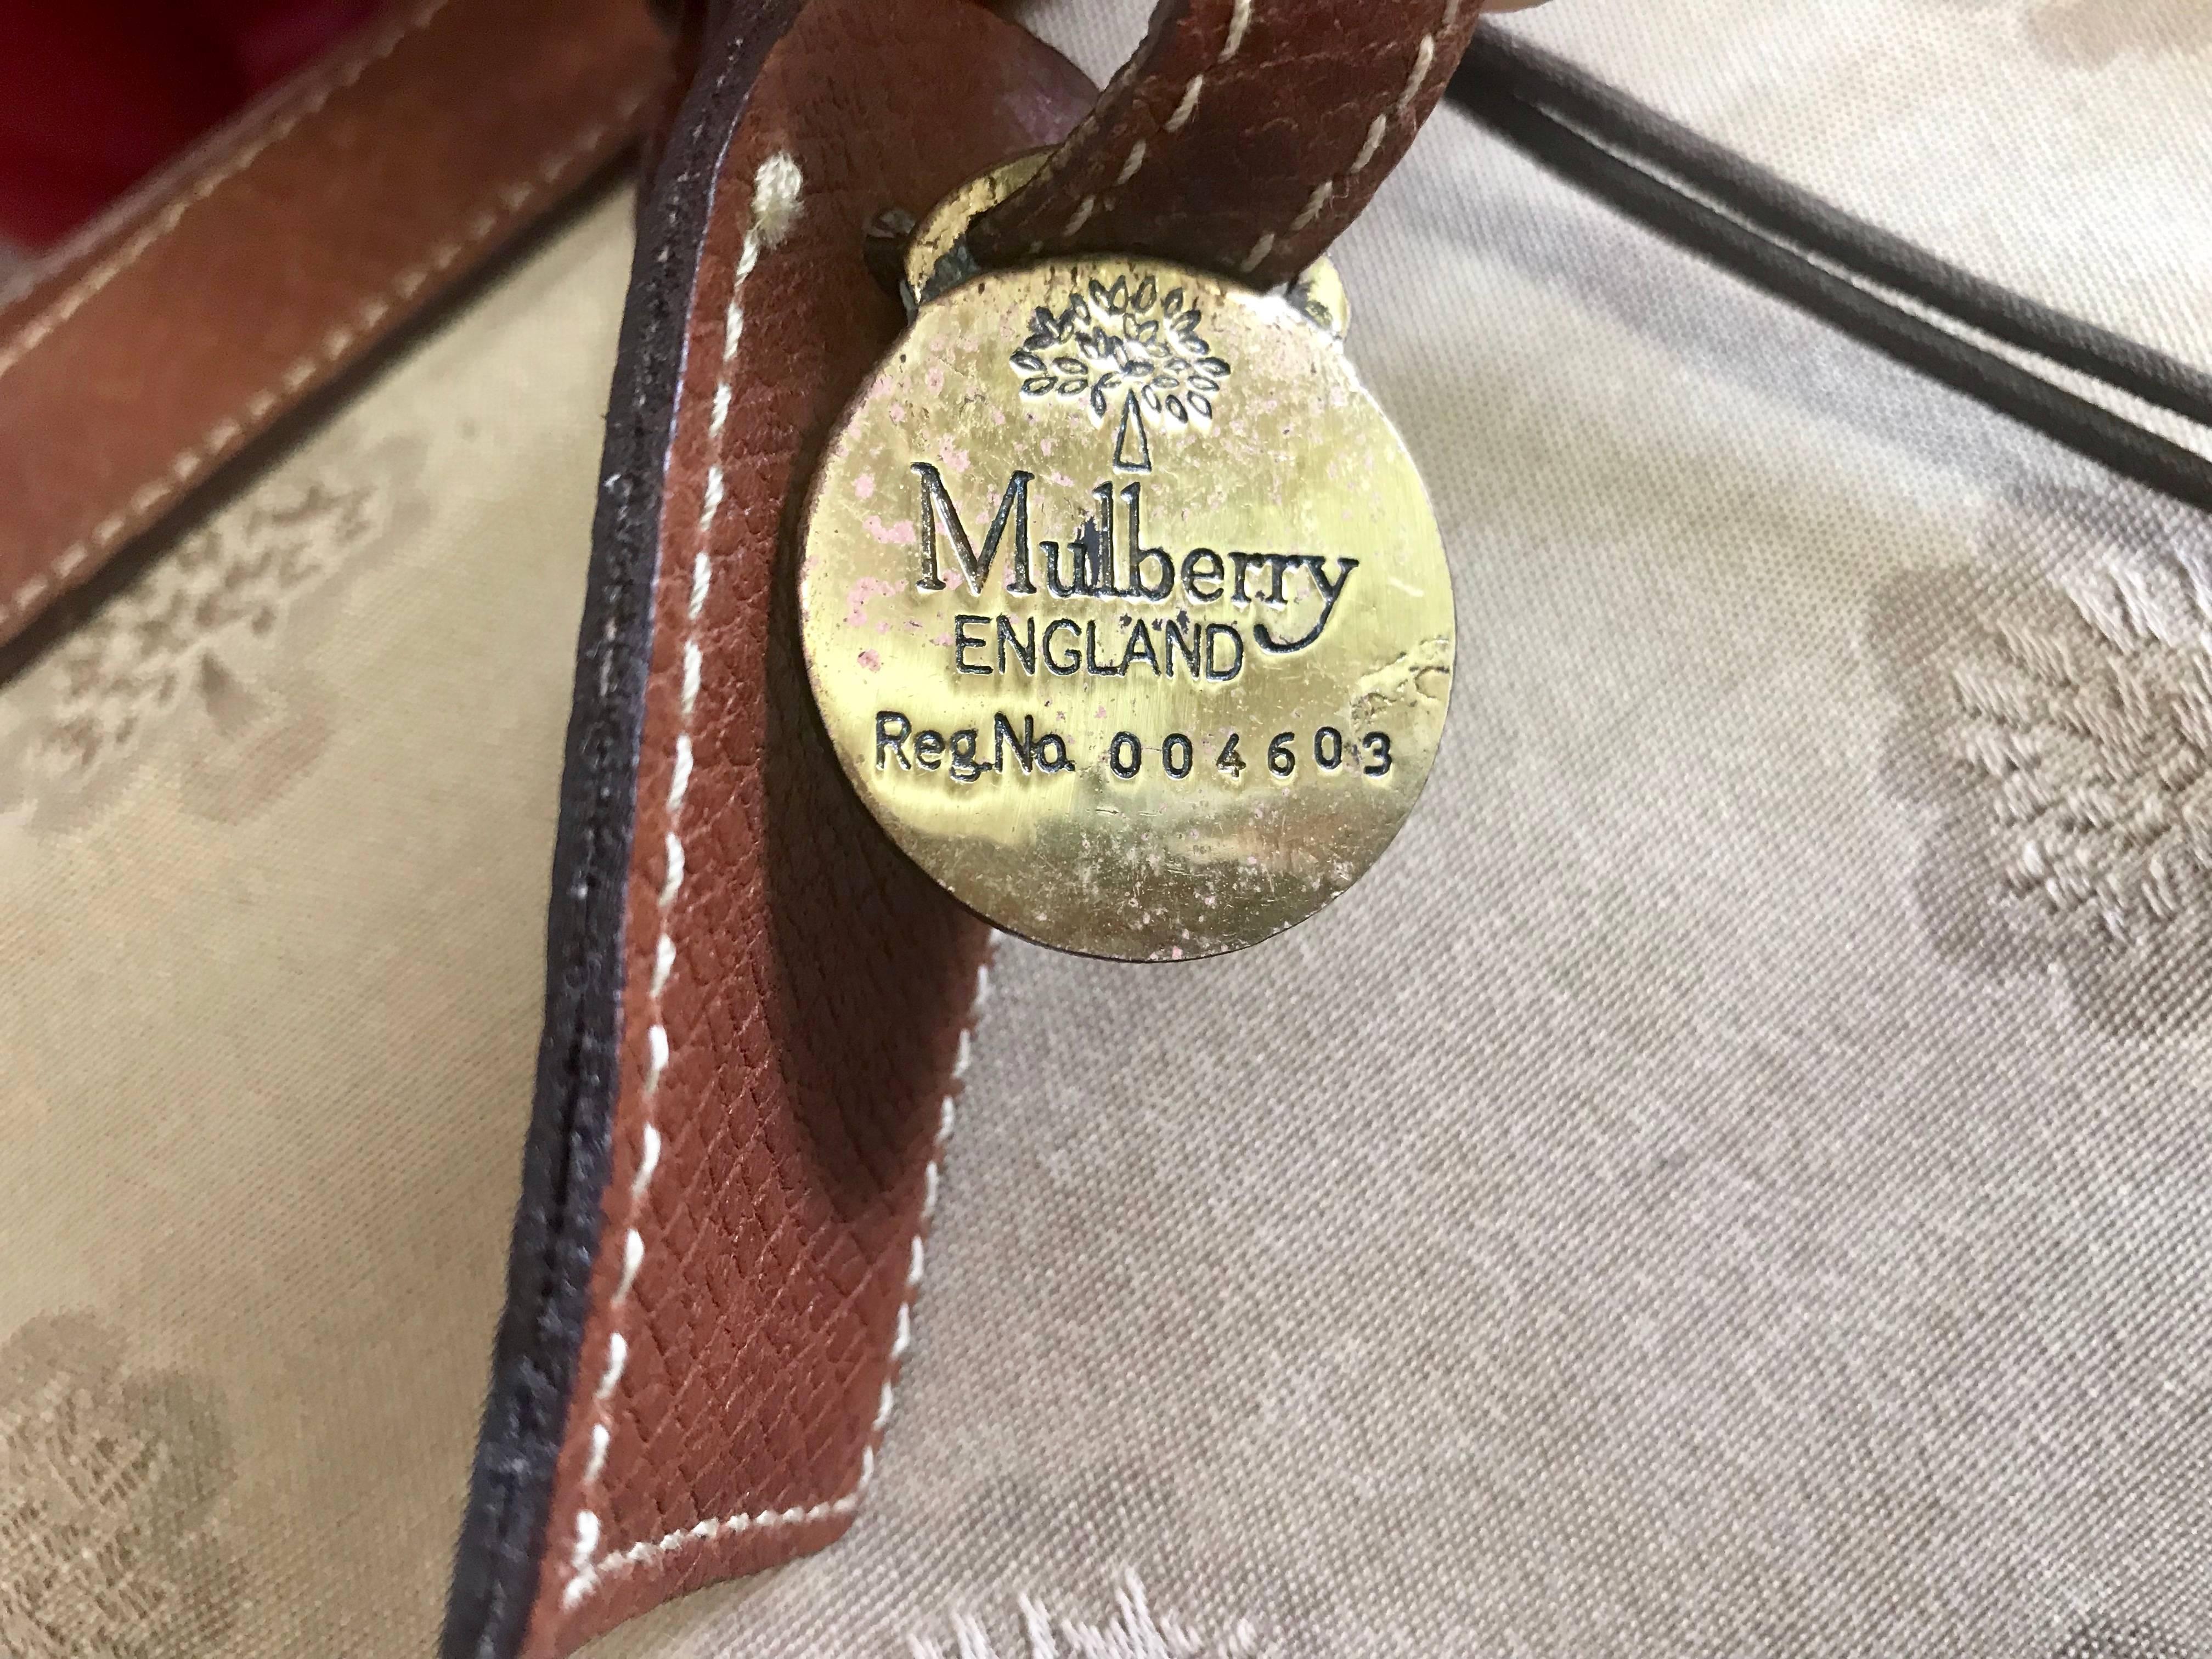 Vintage Mulberry beige logo jacquard fabric travel bag, duffle bag with leather. 10